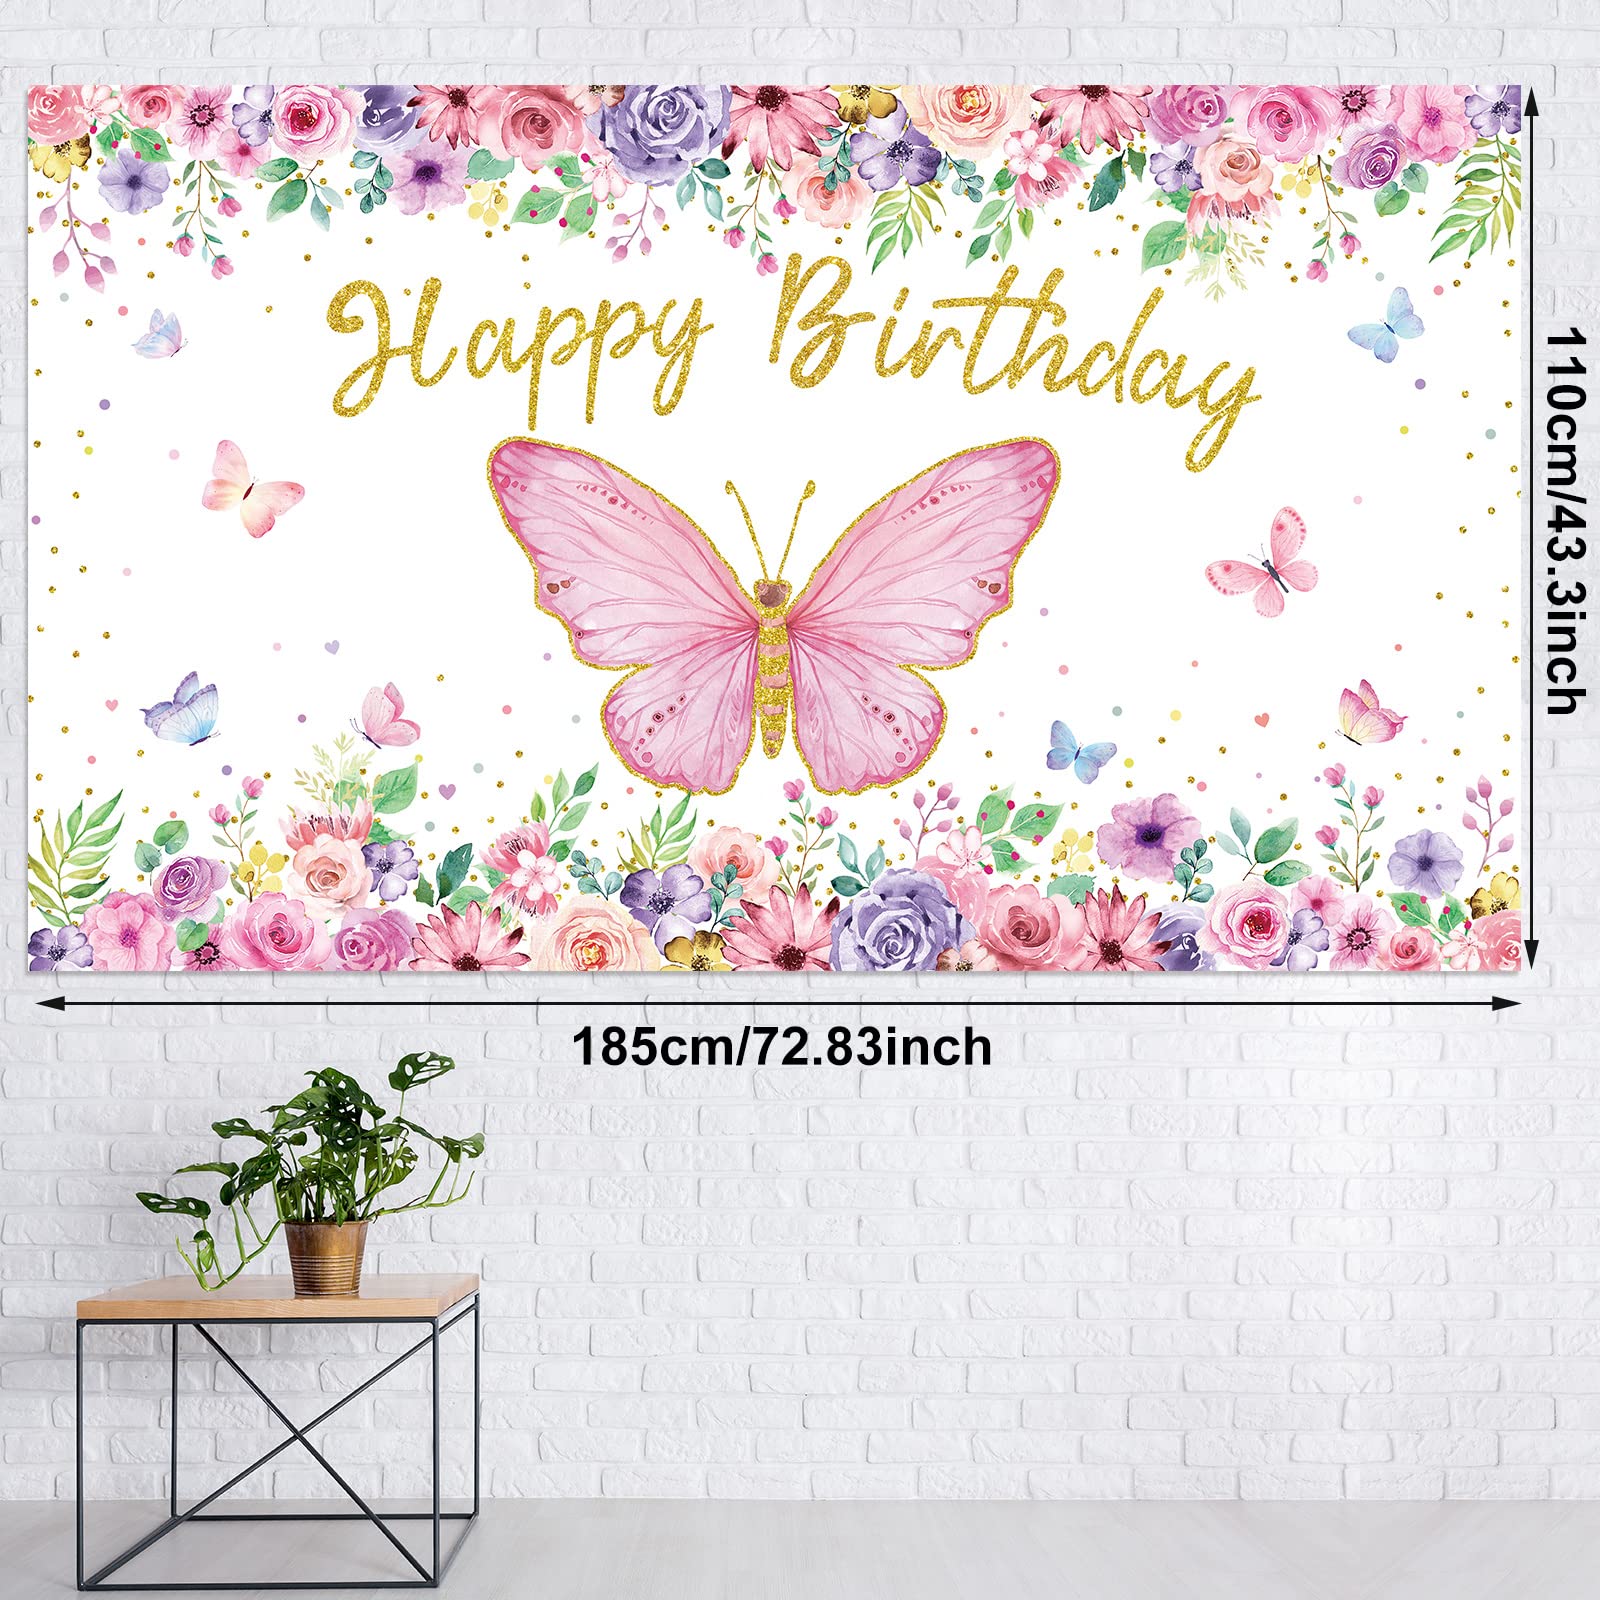 Pink and Purple Butterfly Party Decorations Include Pink Purple Balloon Arch Kit Butterfly Happy Birthday Photography Backdrop Banner Tablecloth for Girls Women Birthday Party Supplies Decor